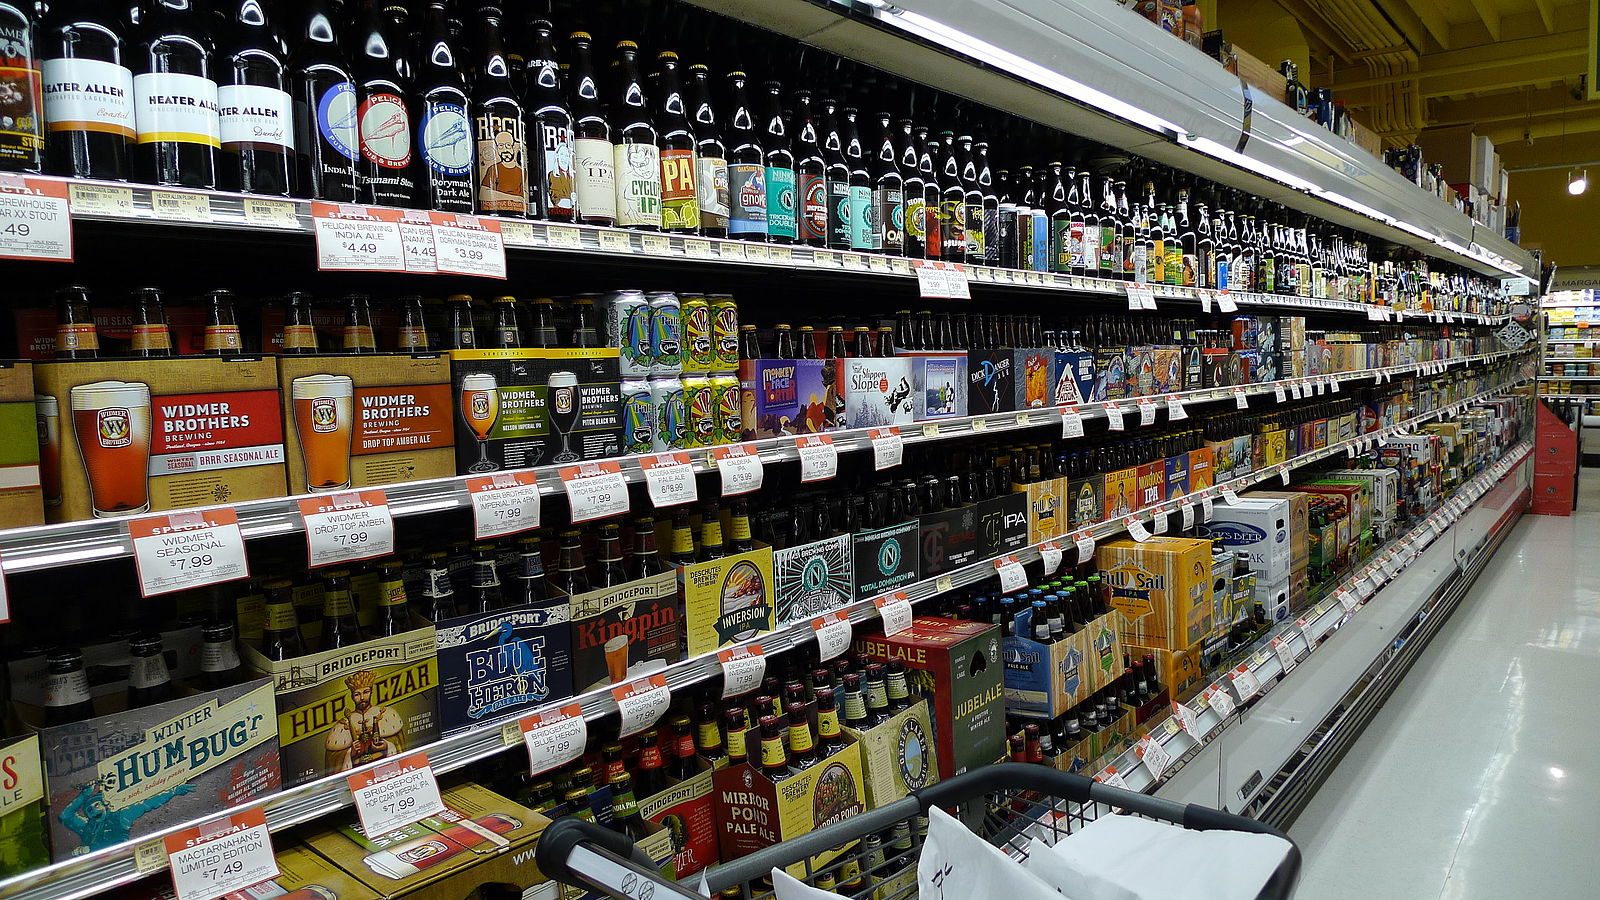 A liquor section at the New Seasons Market Inc. (a privately held company)